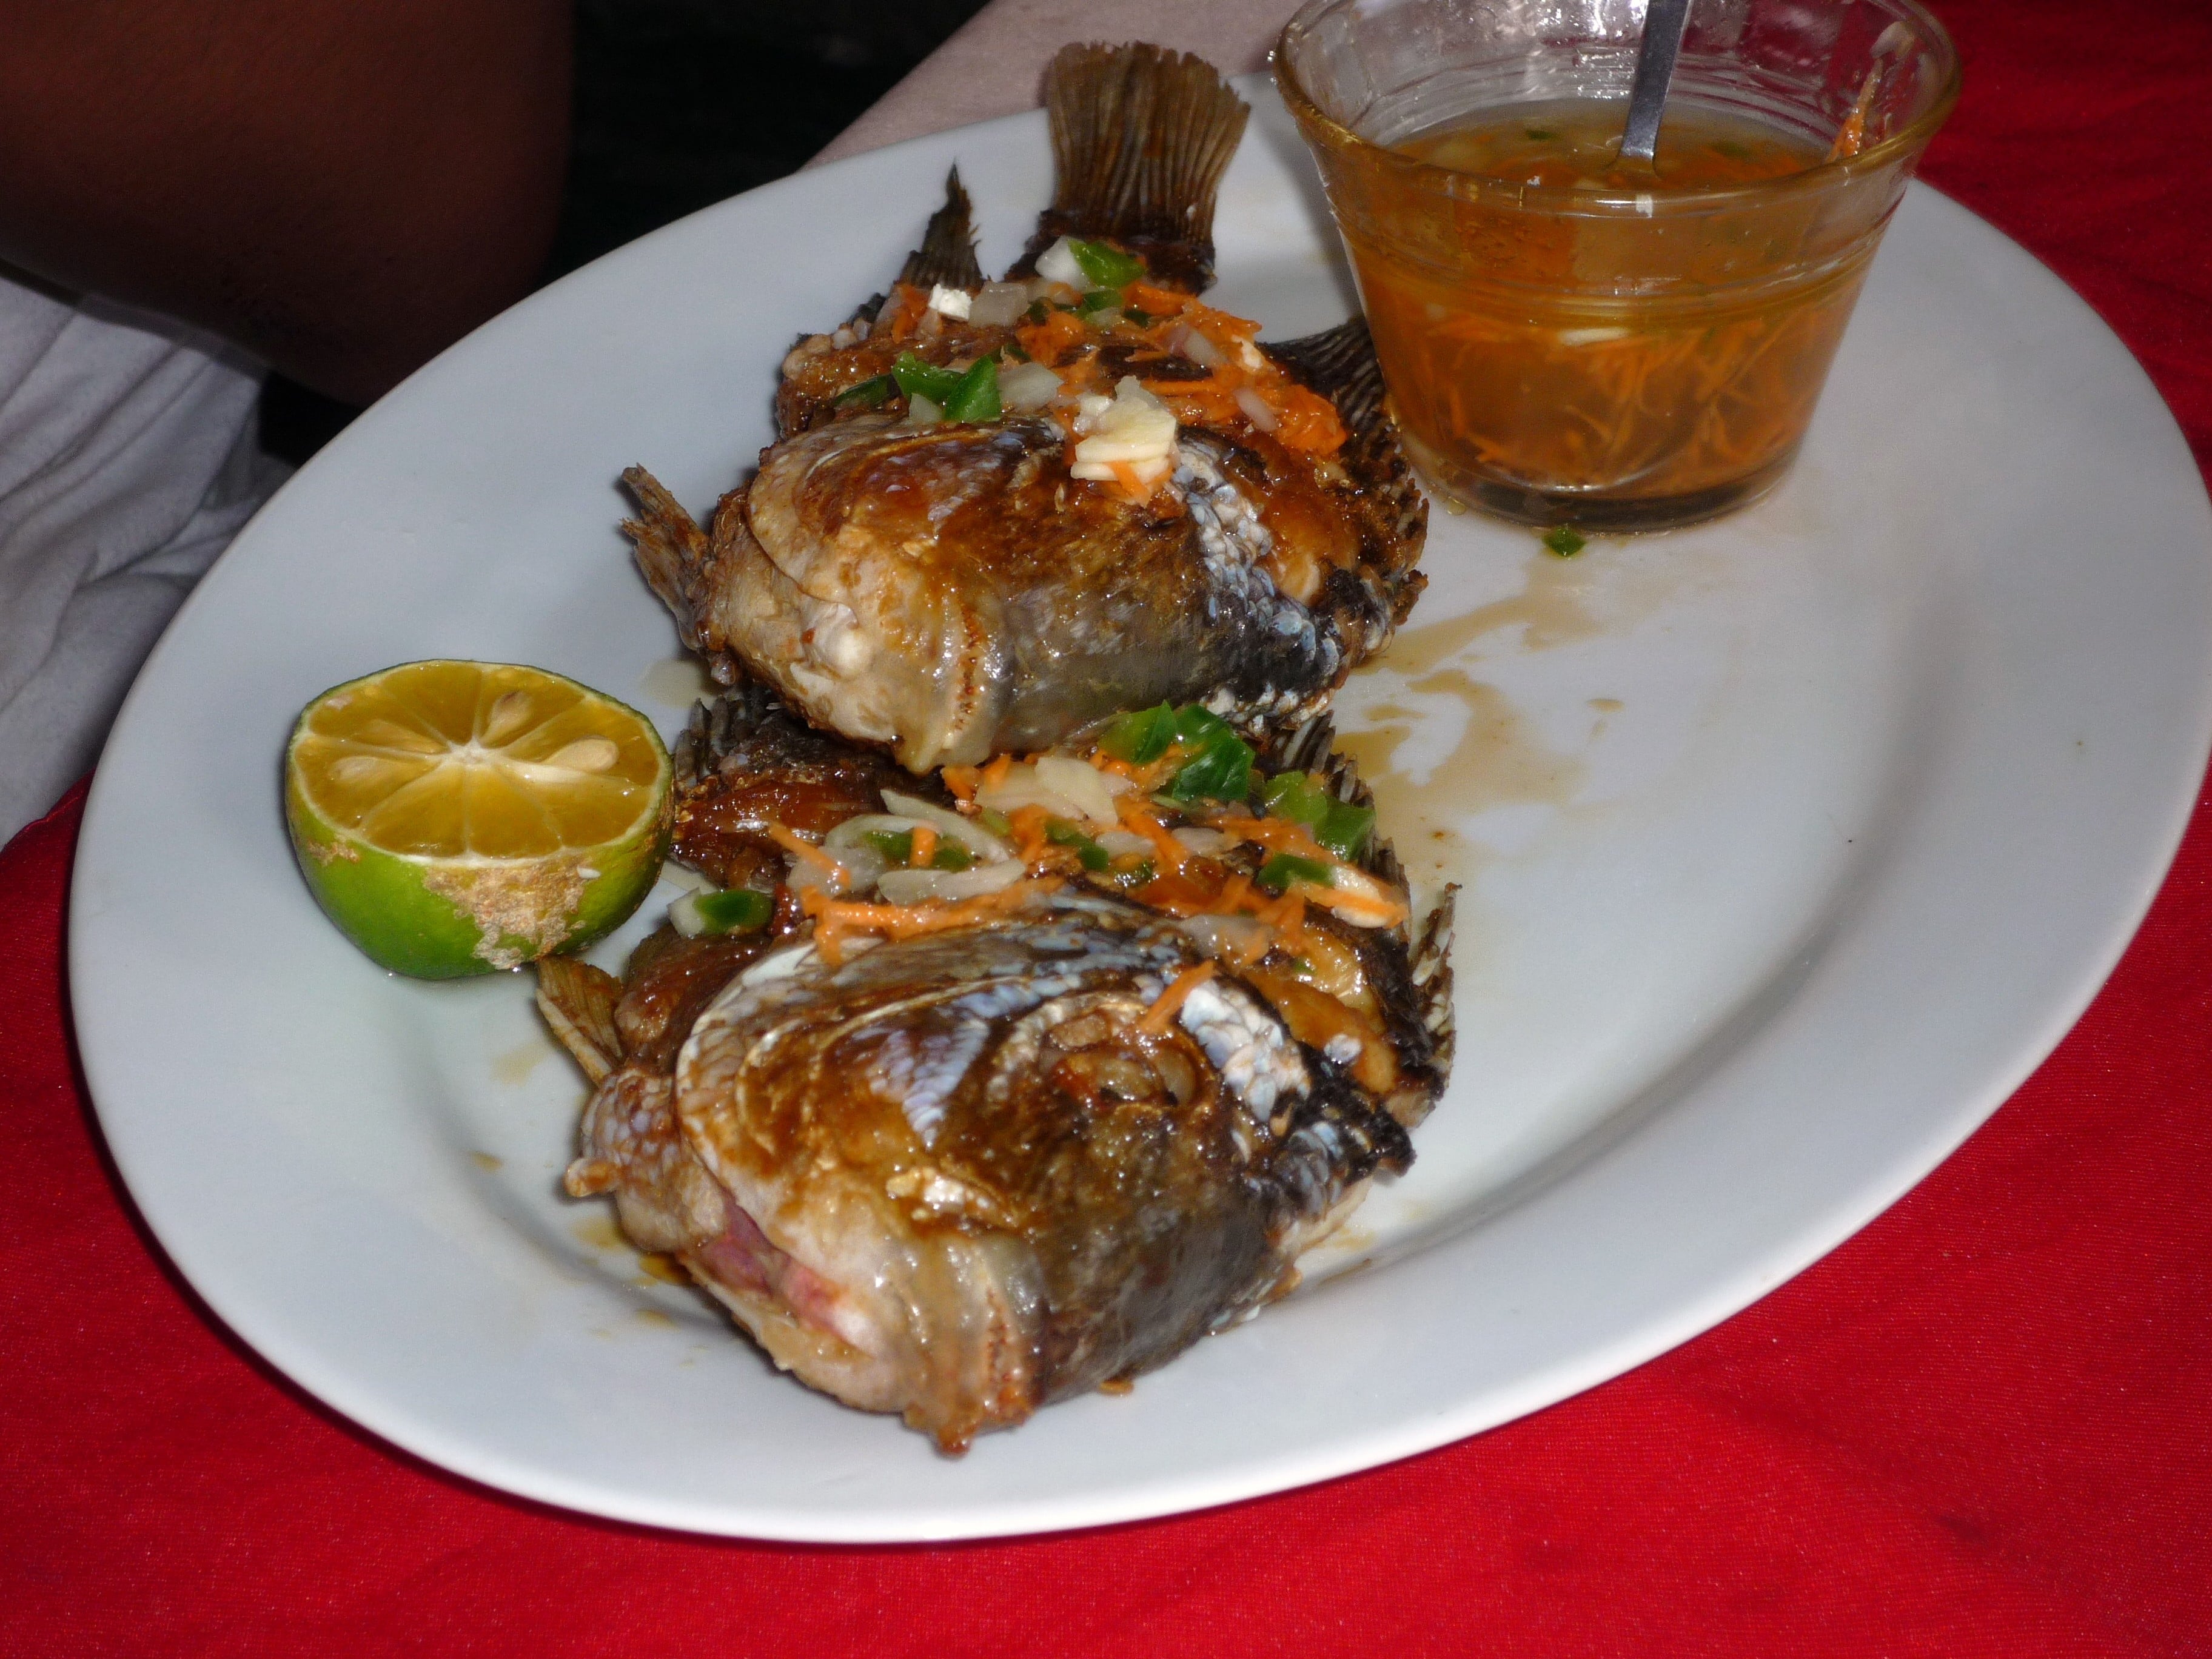 Delicious fried fish